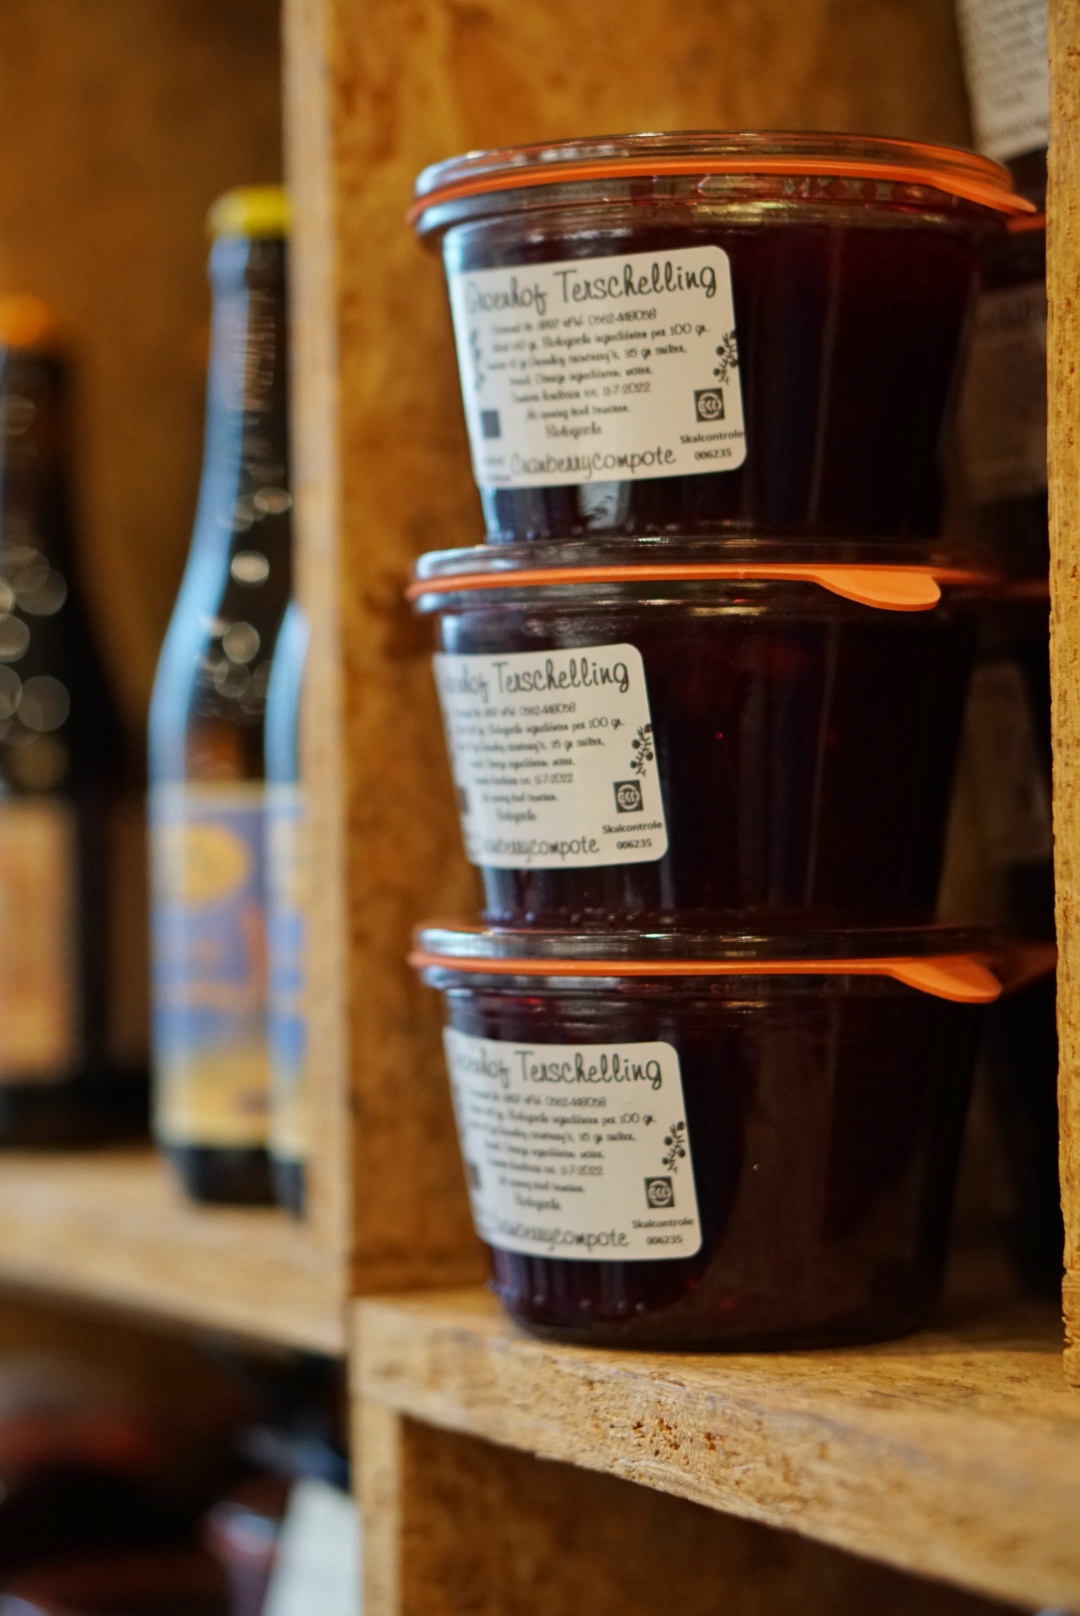 Locally produced - Sustainability - local goods jam - Terschelling